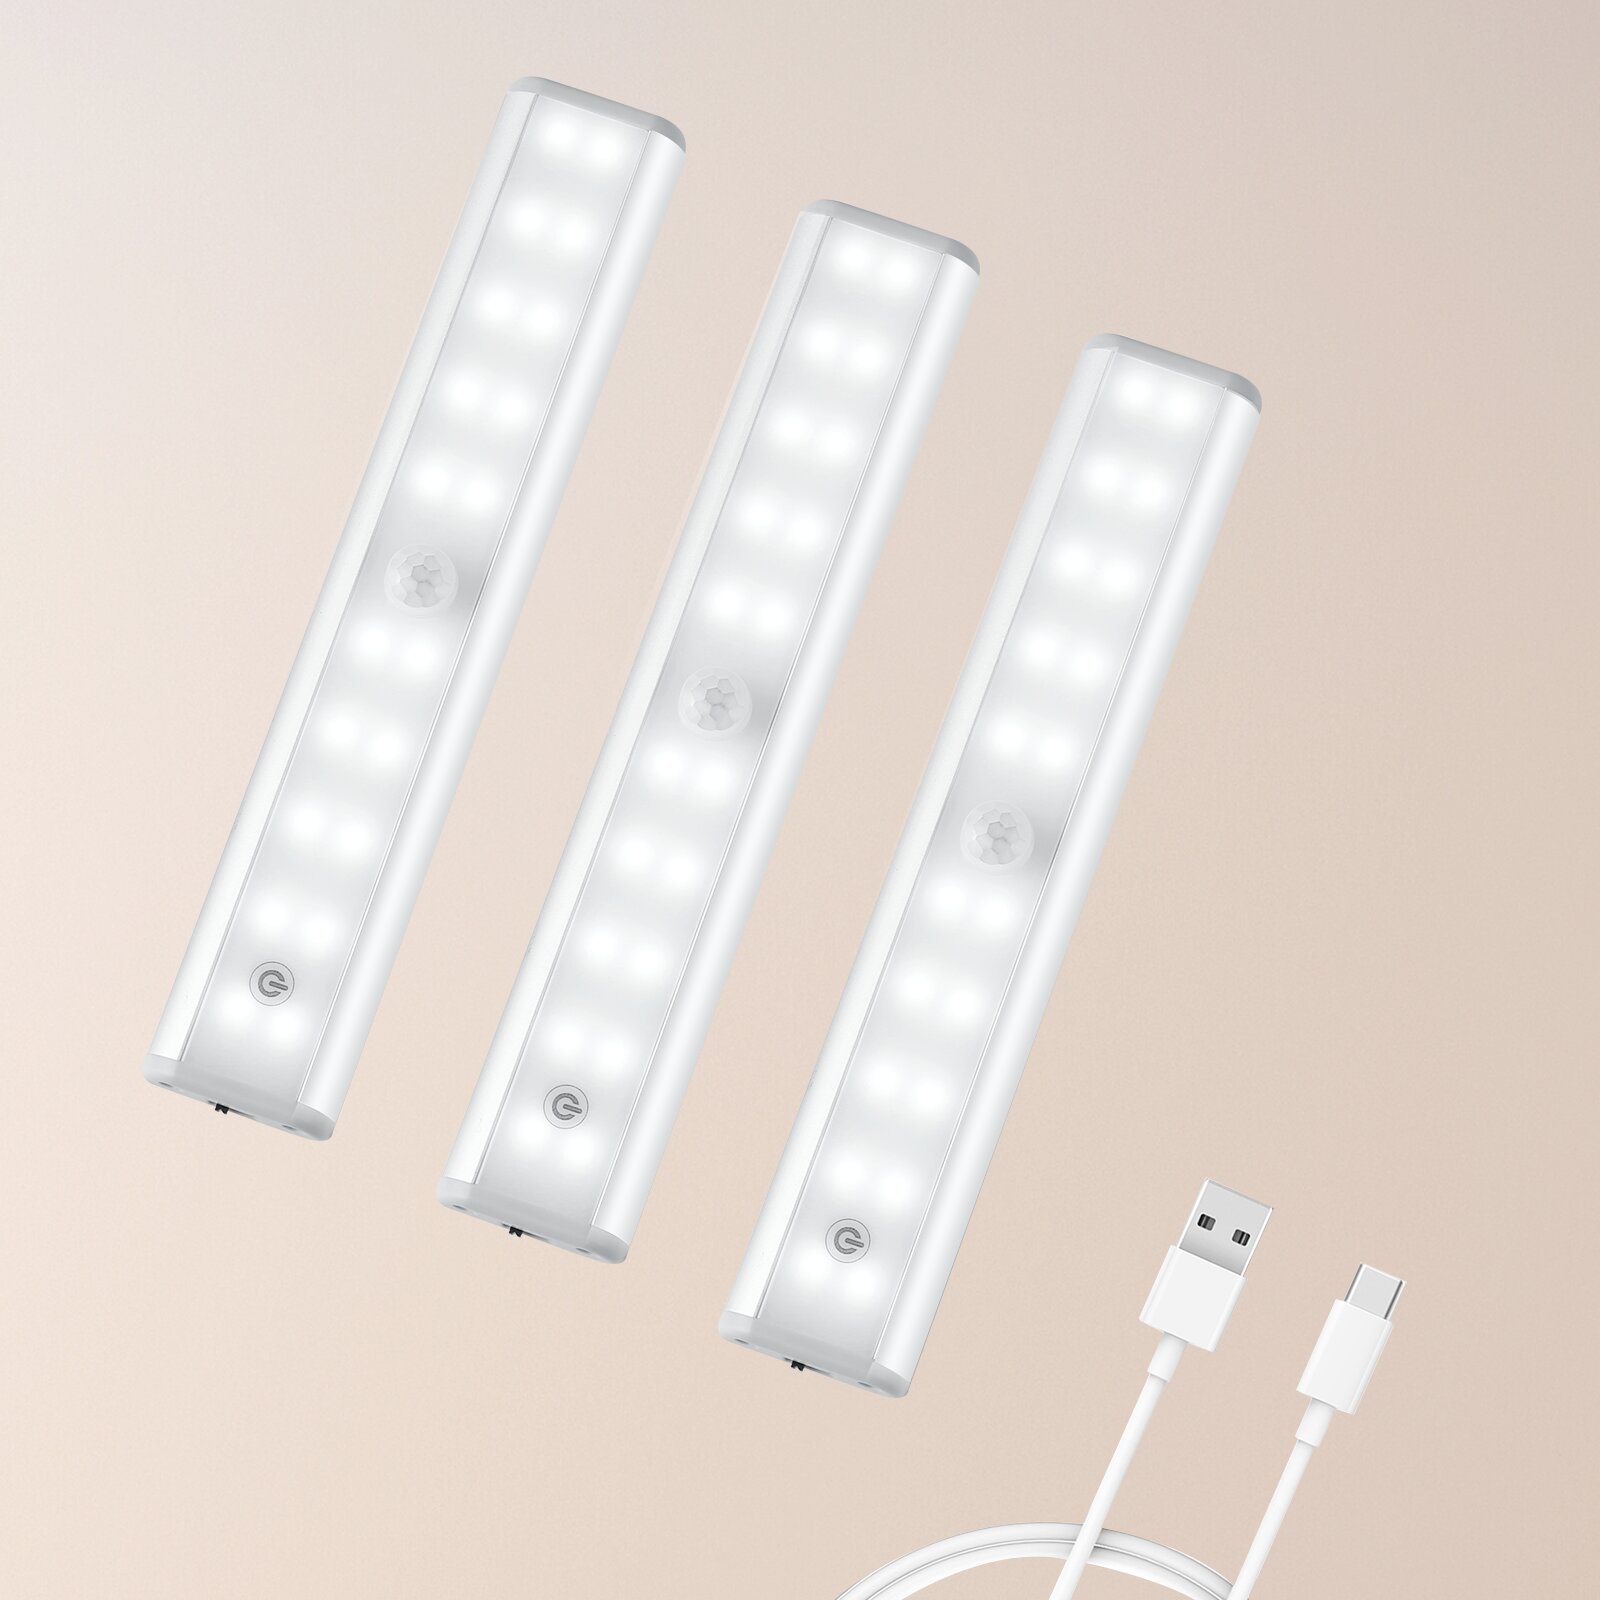 Dimmable 3 Color Temperature, LED Under Cabinet Lighting Bar Built-in Magnets 